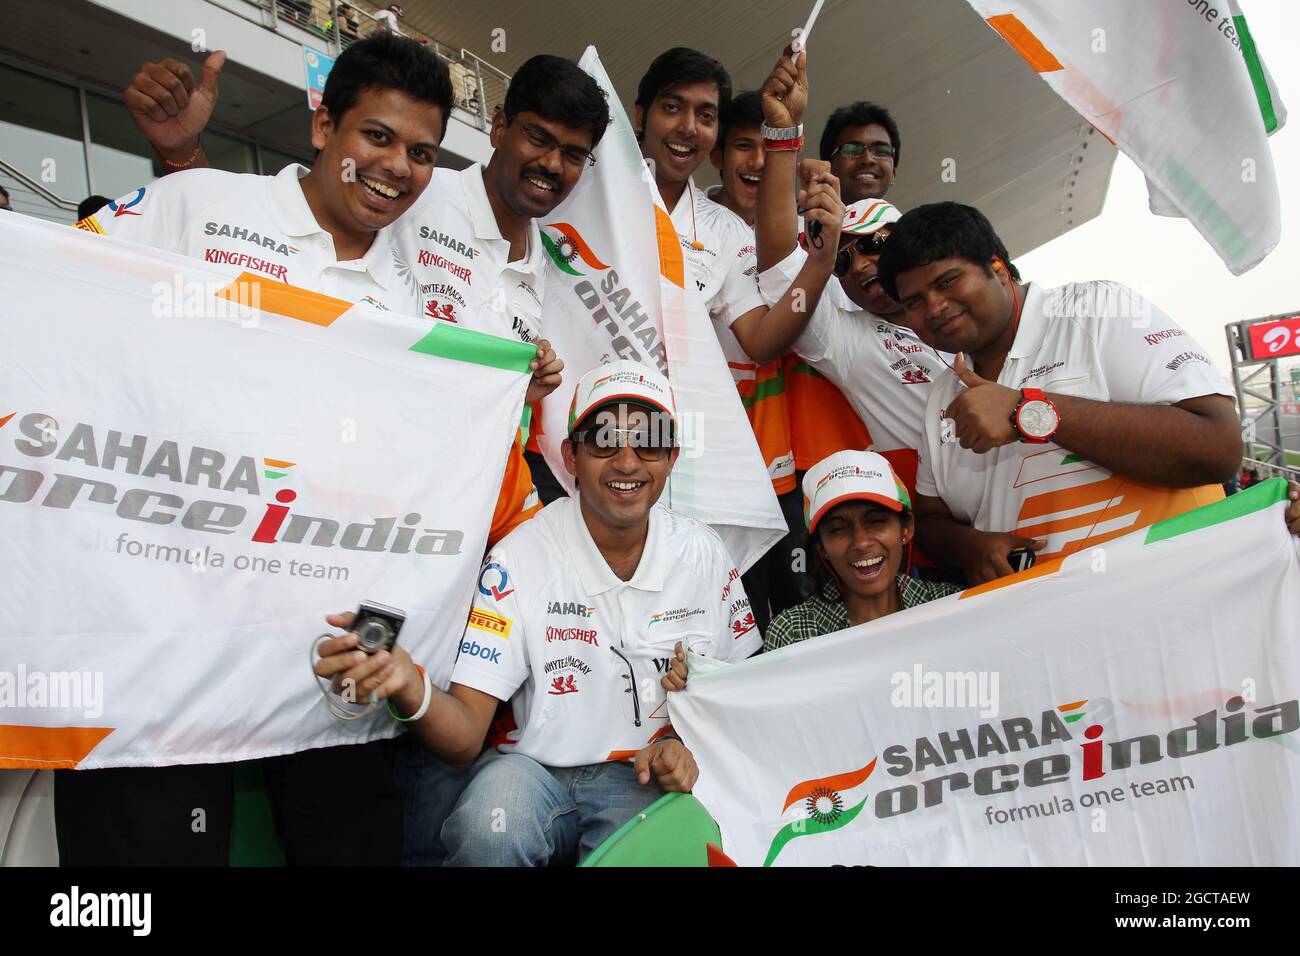 Sahara Force India F1 Team fans in the grandstand. Indian Grand Prix, Saturday 26th October 2013. Greater Noida, New Delhi, India. Stock Photo